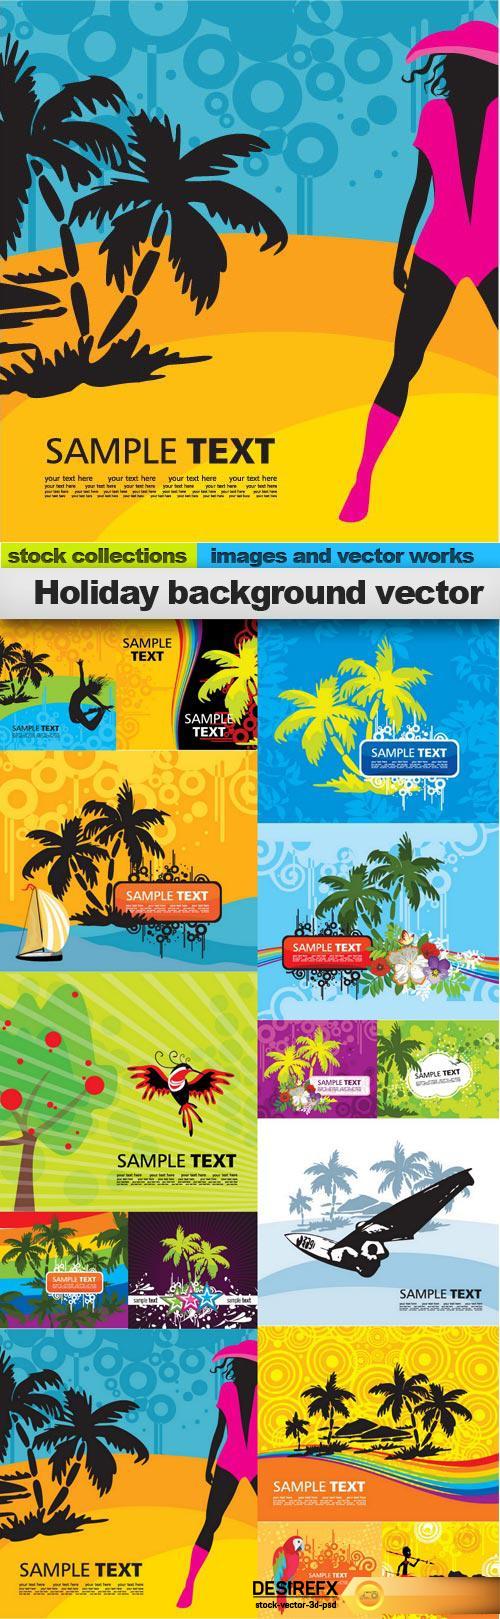 Holiday background vector, 15 x EPS